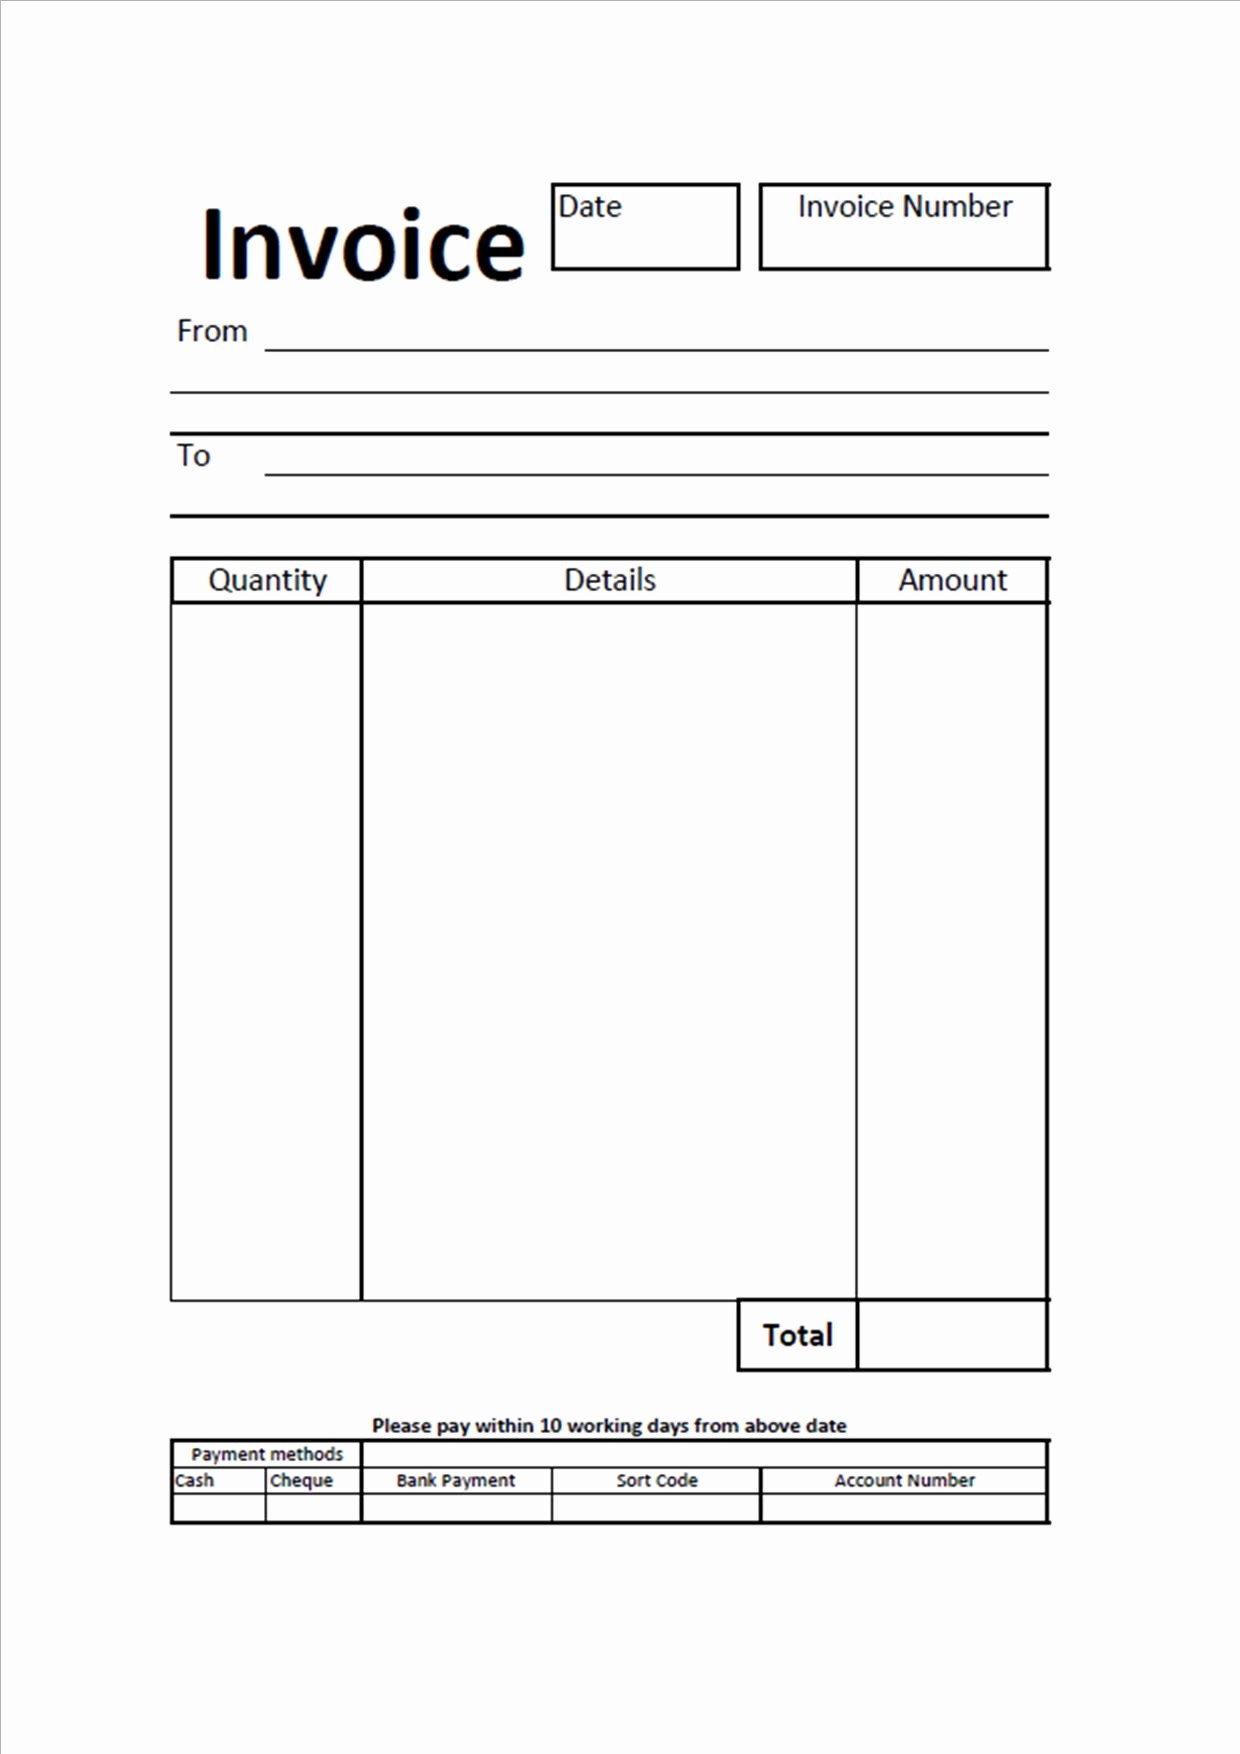 Copy Of A Blank Invoice Lovely Creating Invoices for Your Business – Susan Reading